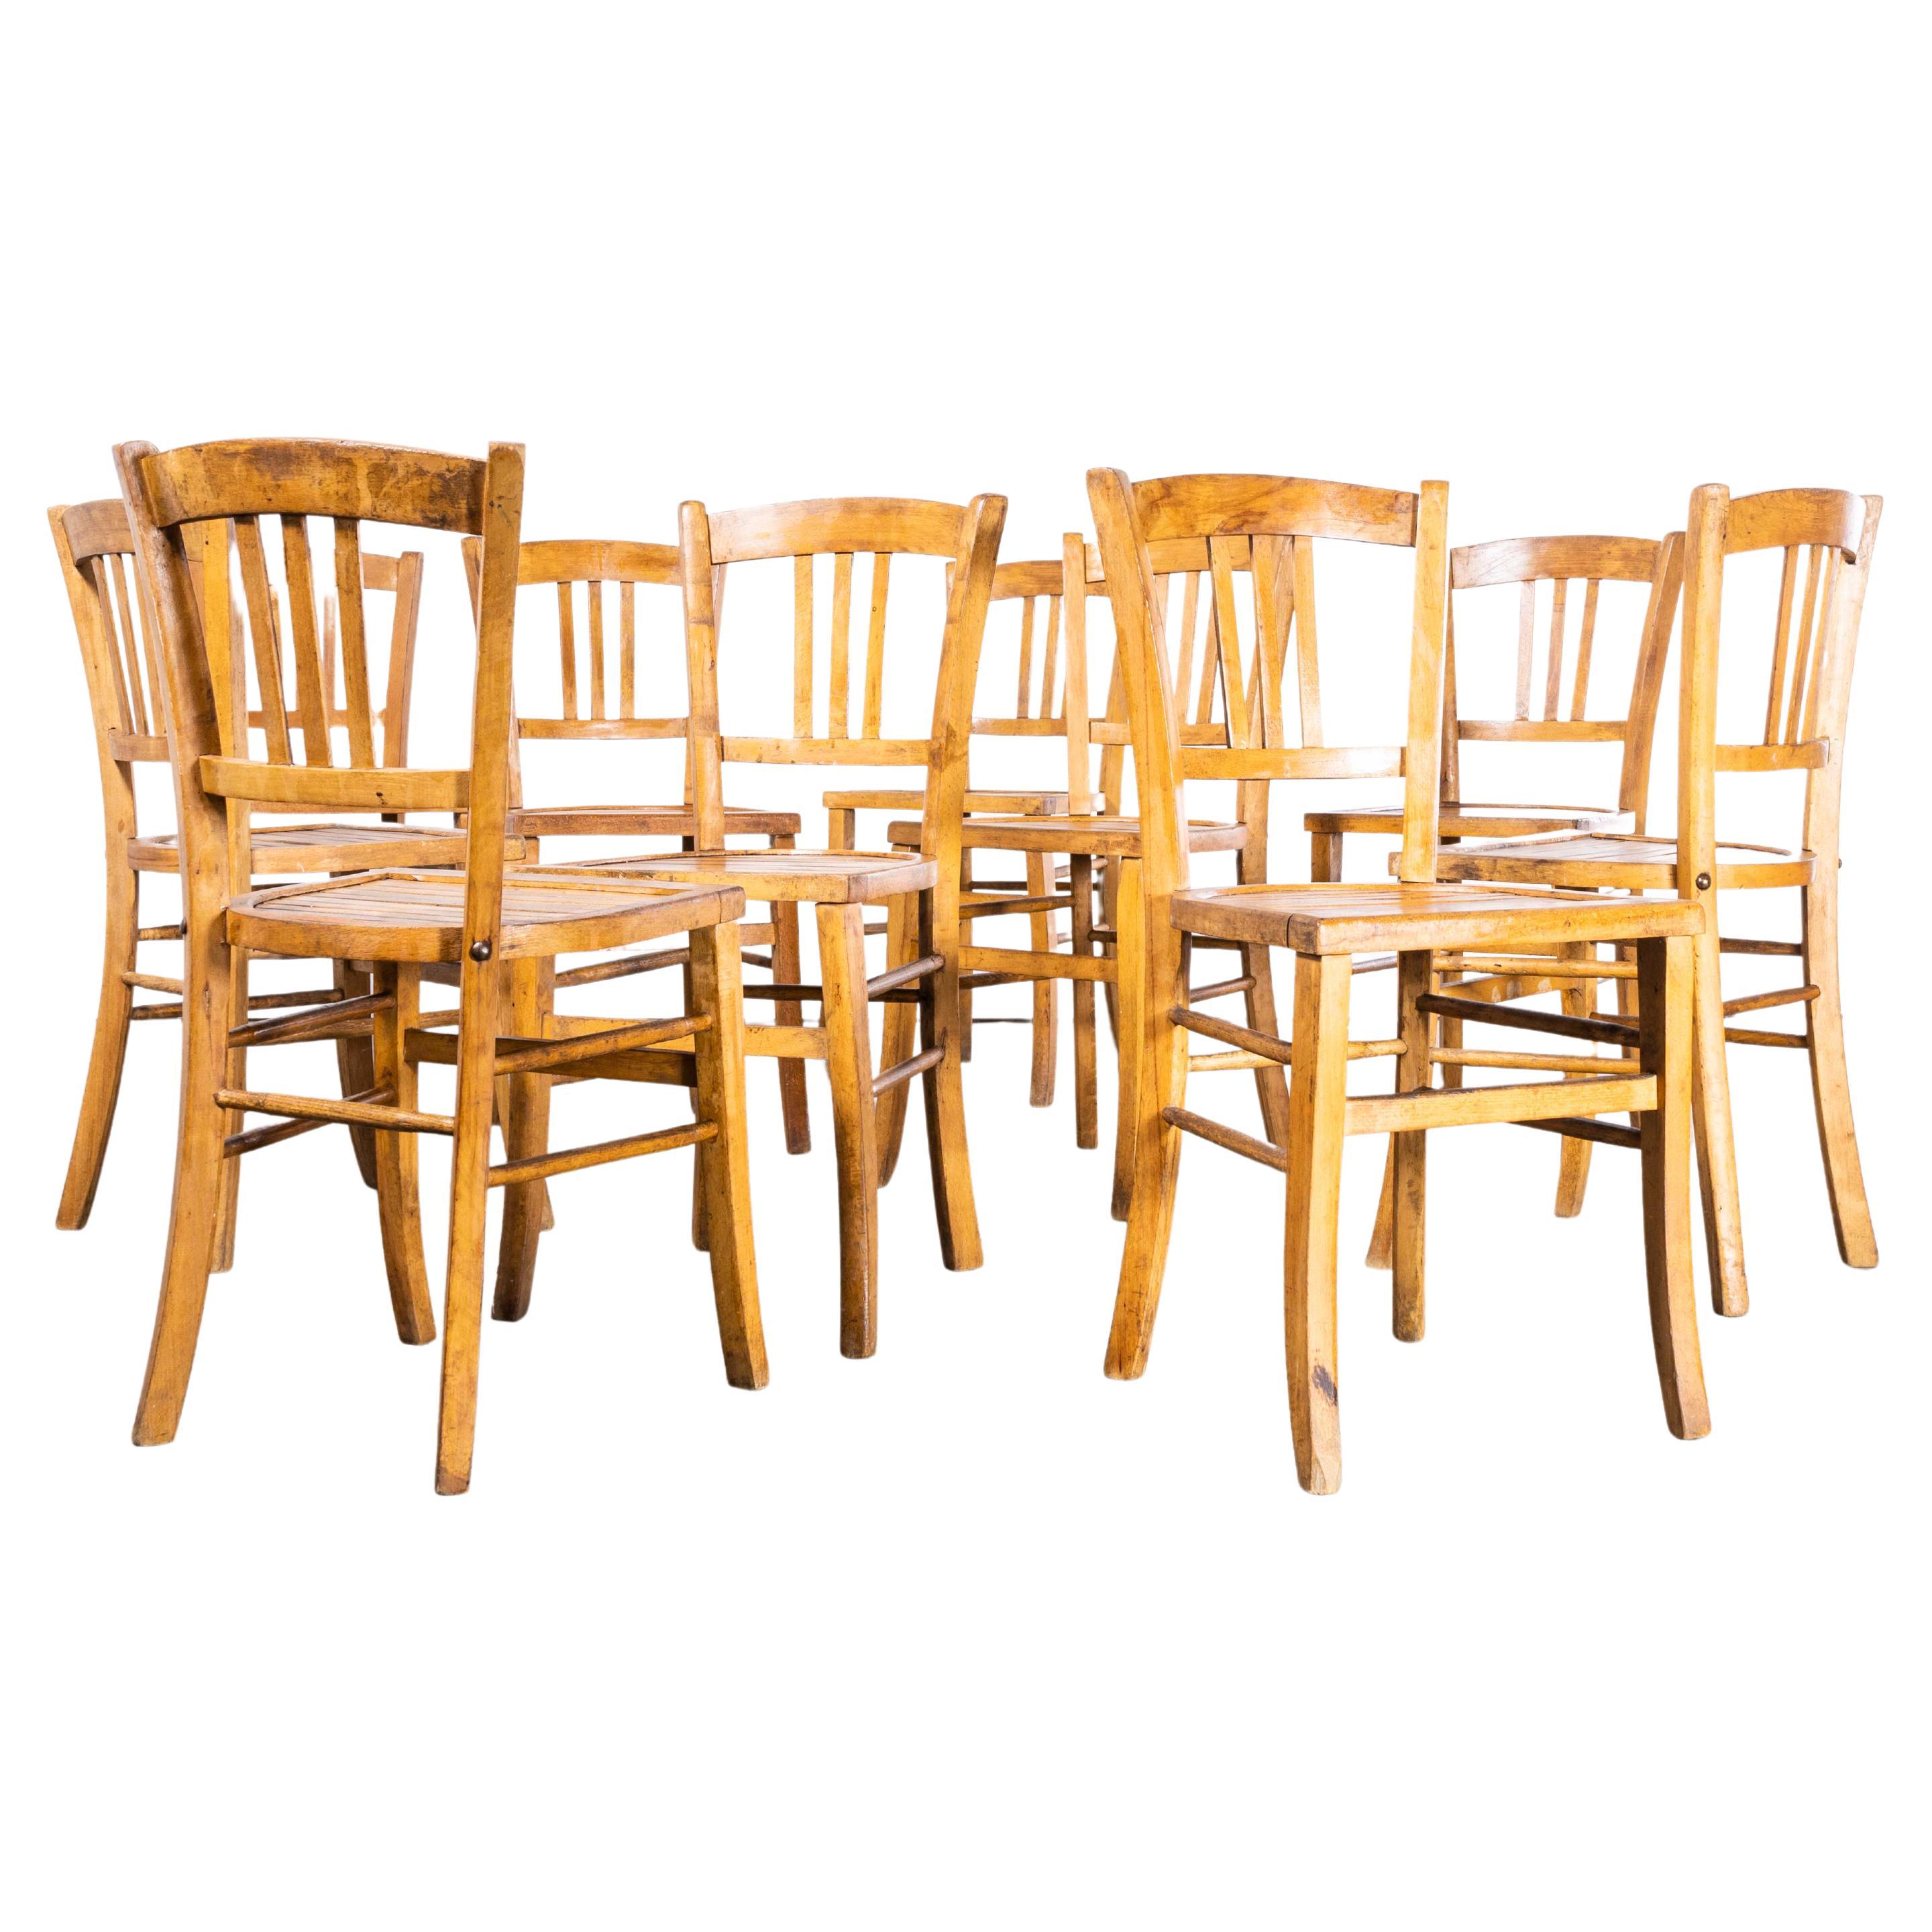 1950's Original French Slatted Farmhouse Chairs From Provence - Set Of Ten